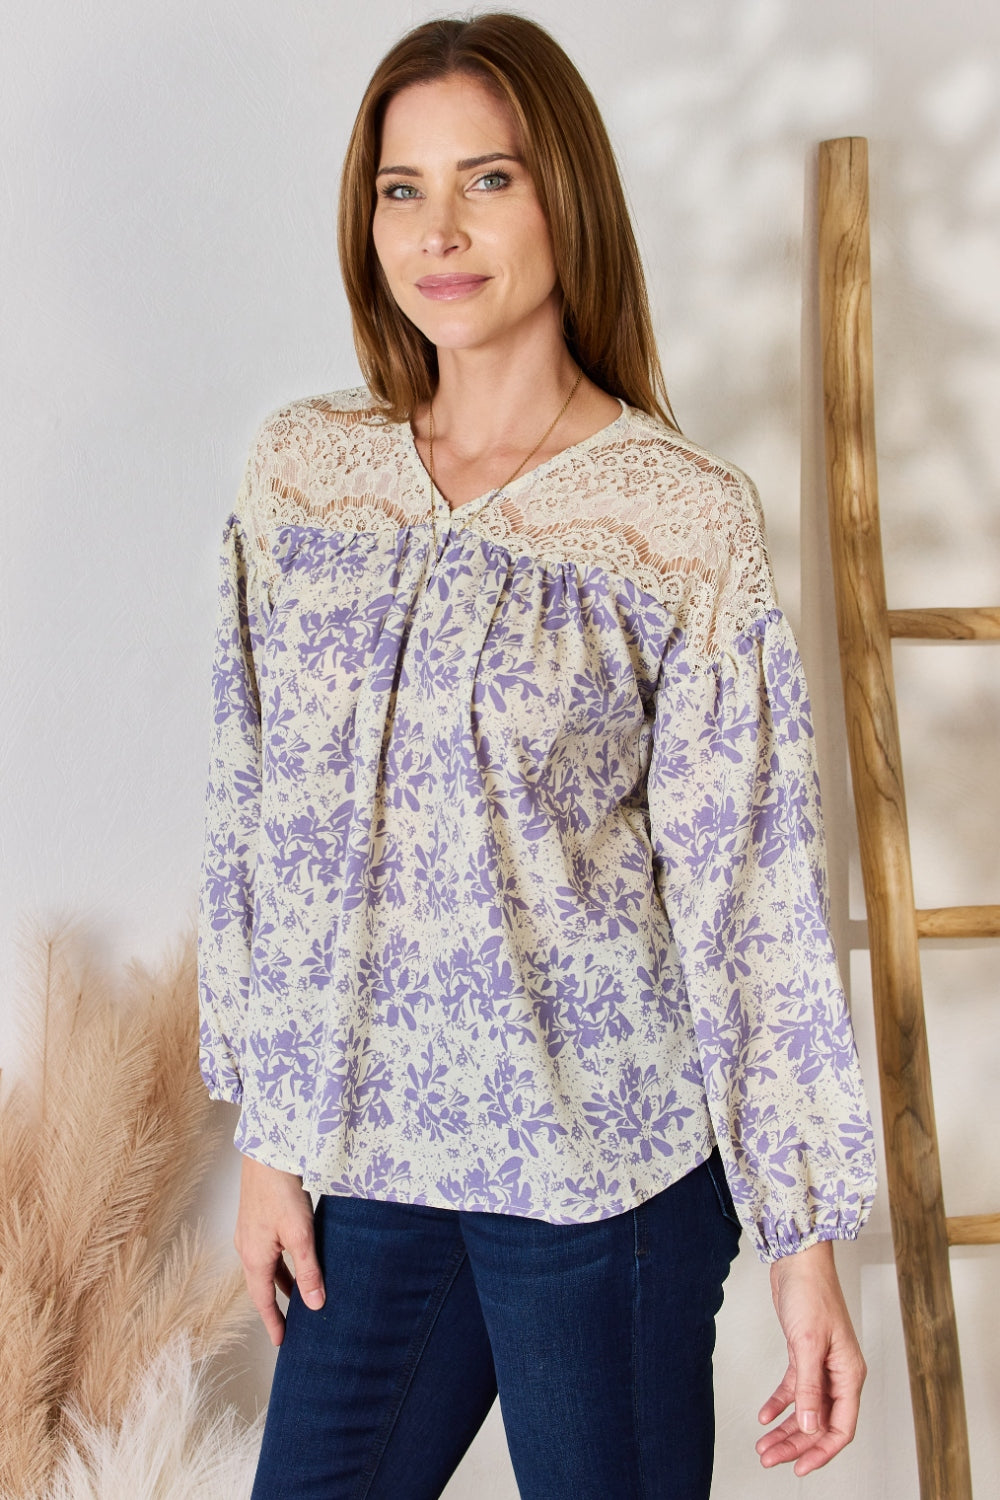 Lace Detail Printed Blouse - All Sizes